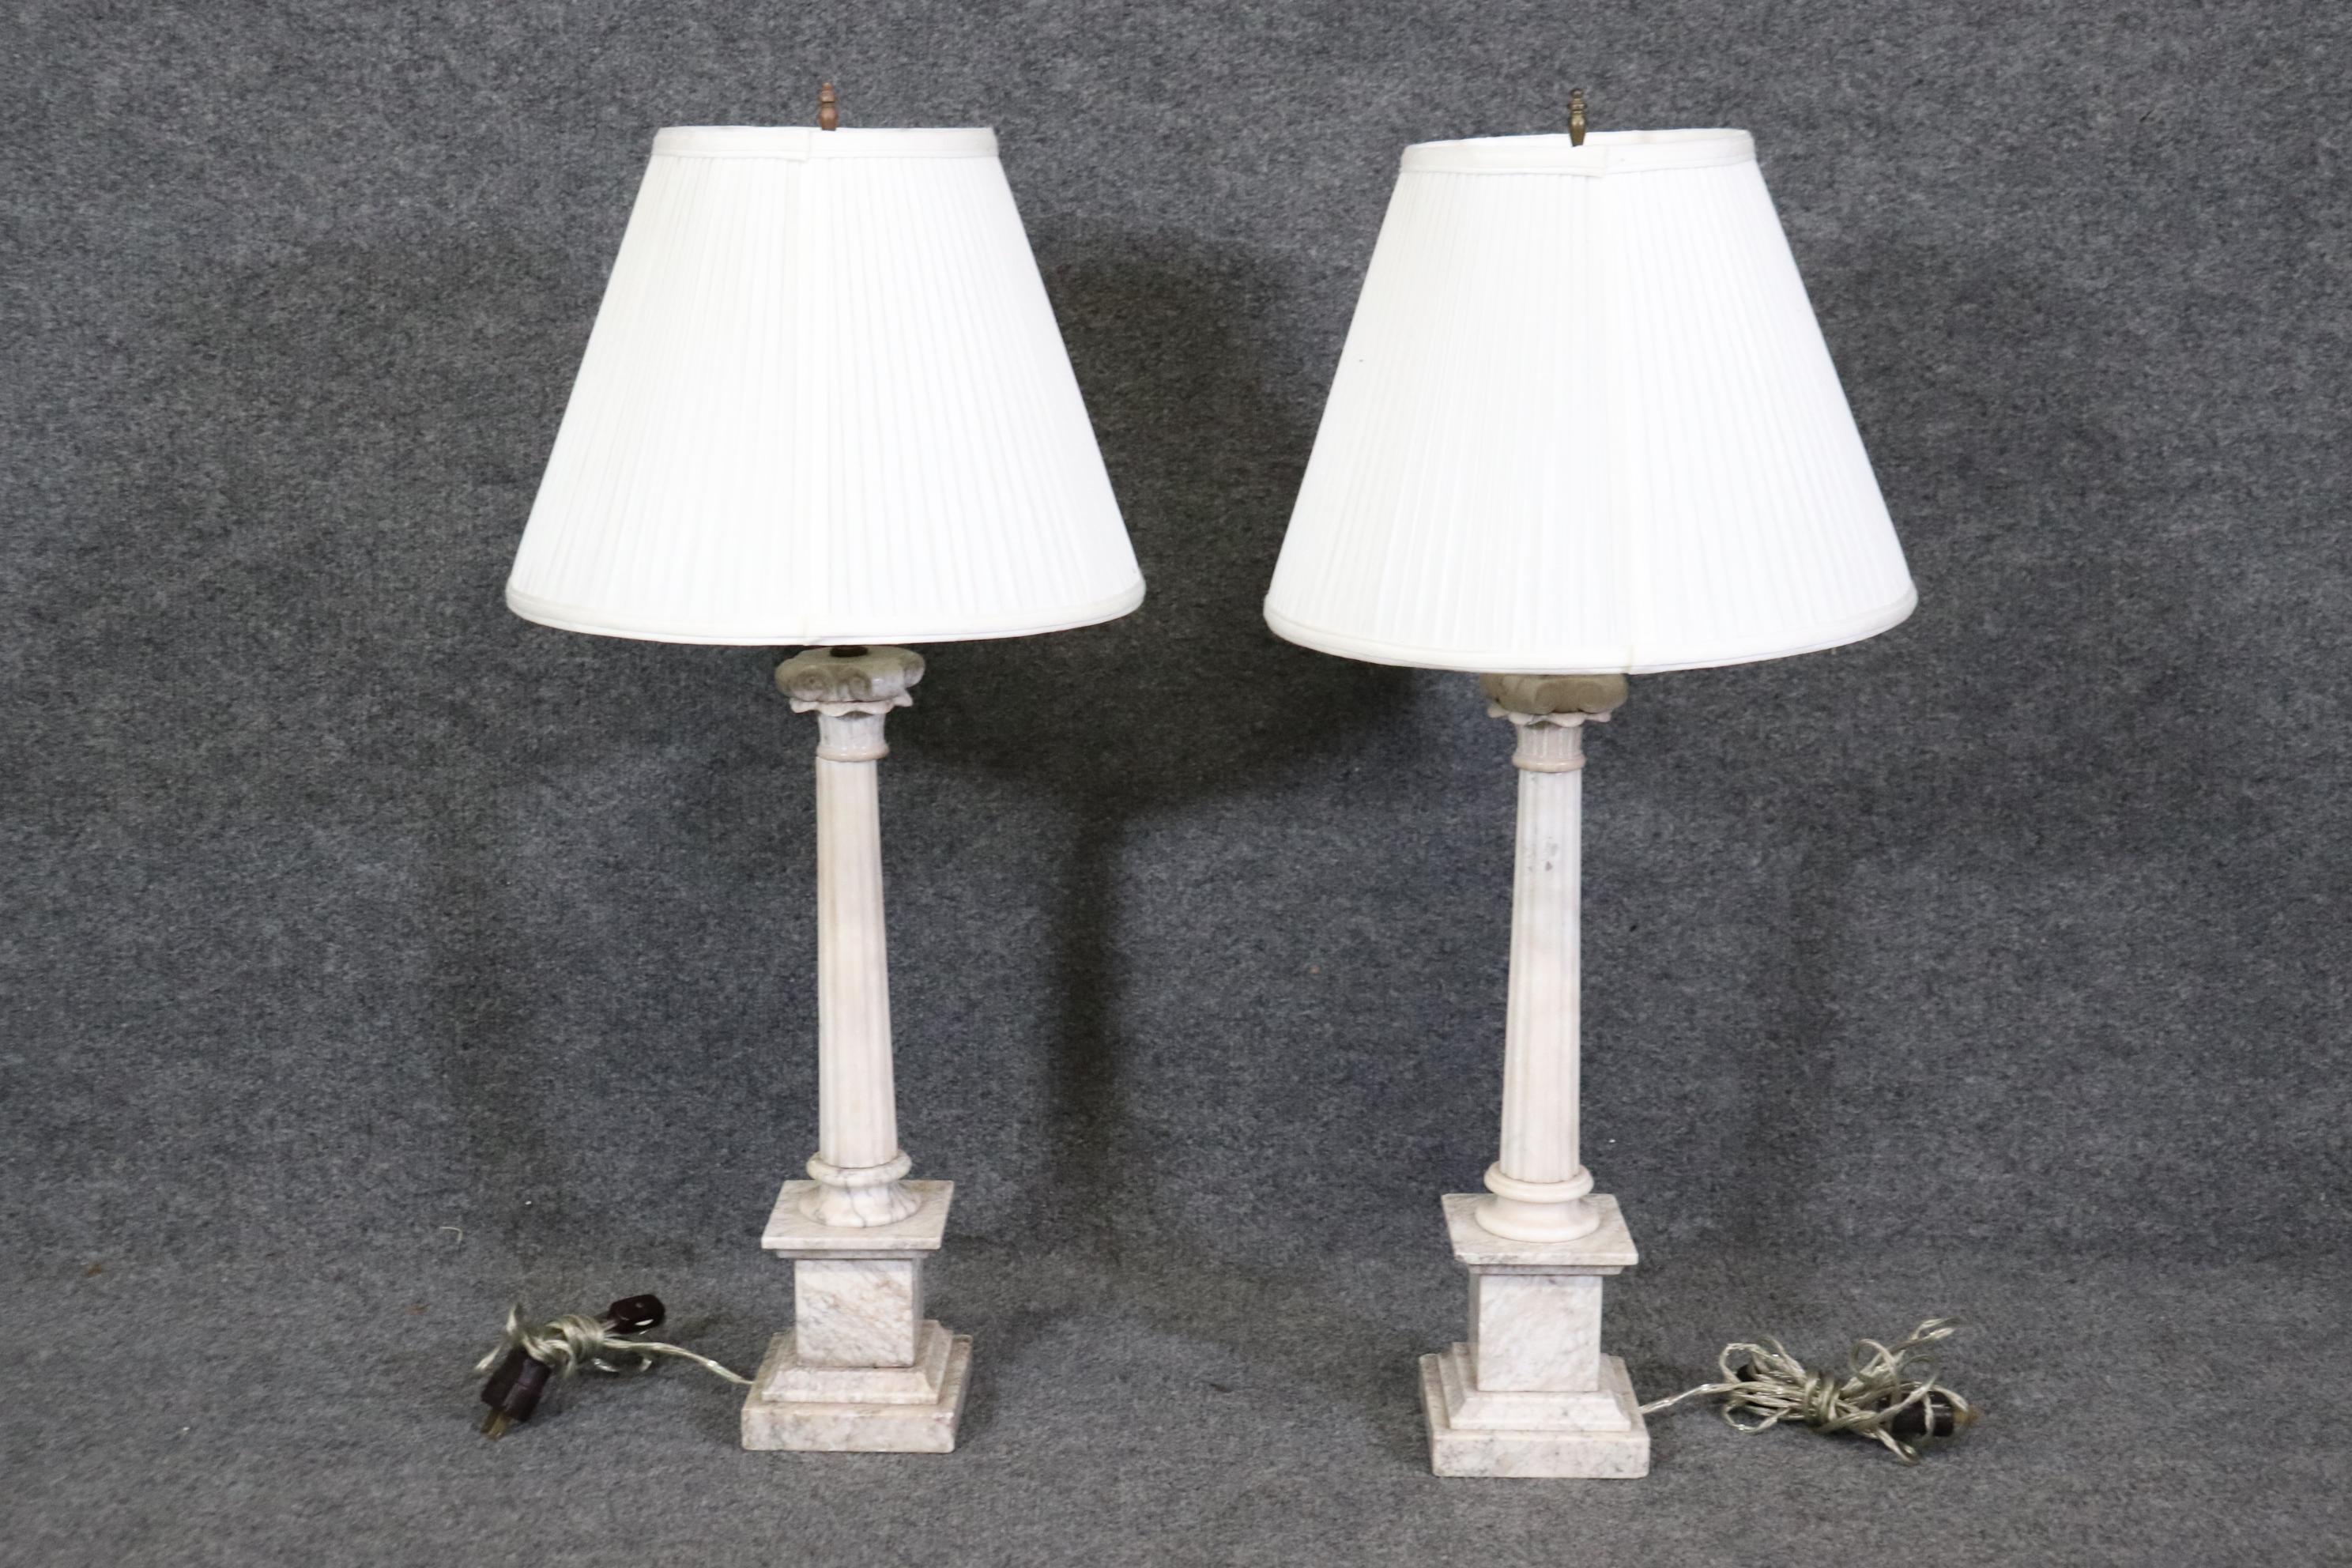 Dimensions- H: 31 1/4in W: 14 1/4in D: 14 1/4in 
This Vintage Pair of Italian Grand Tour Column Alabaster Table Lamps are out of this world and have a unique look that is not seen everyday! This pair is made of white alabaster with gray veins which